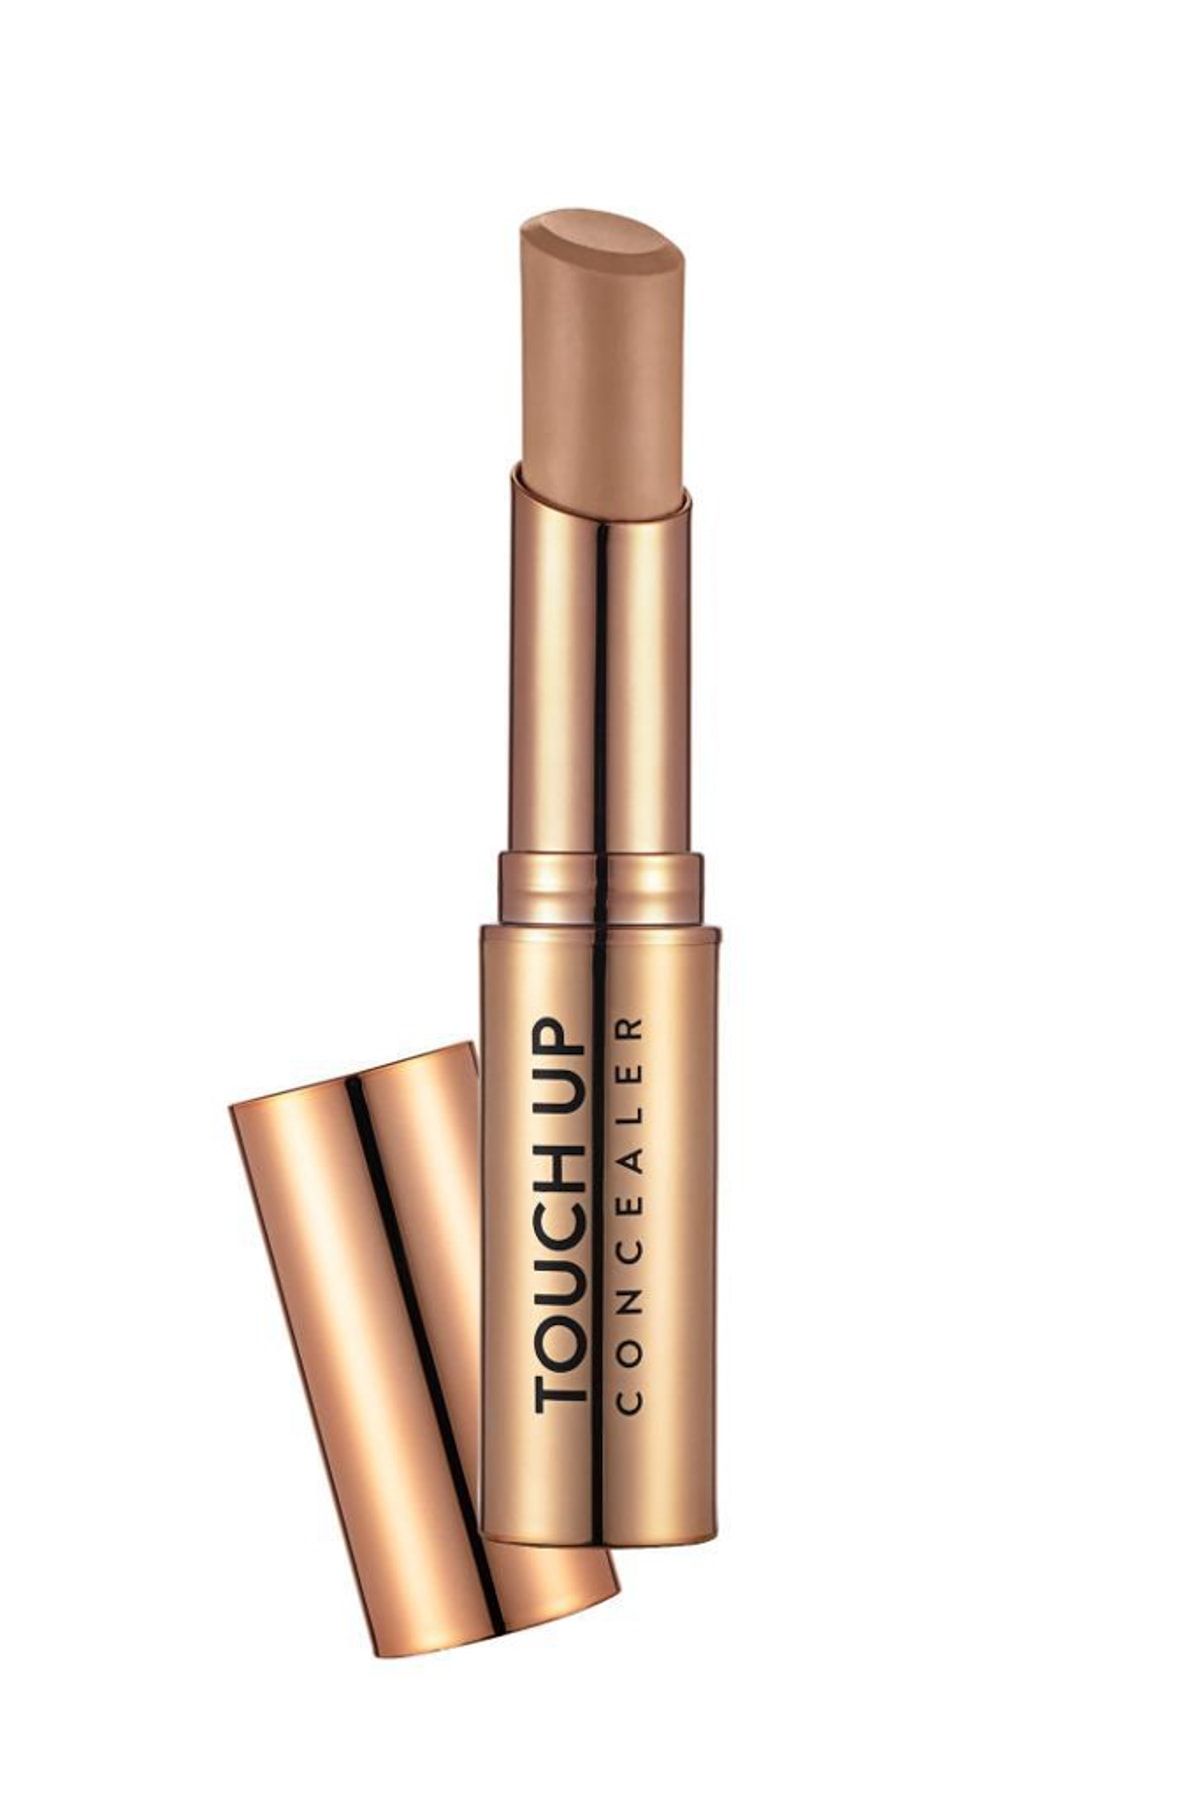 Flormar Touch Up Concealer Ivory 020 8690604639168